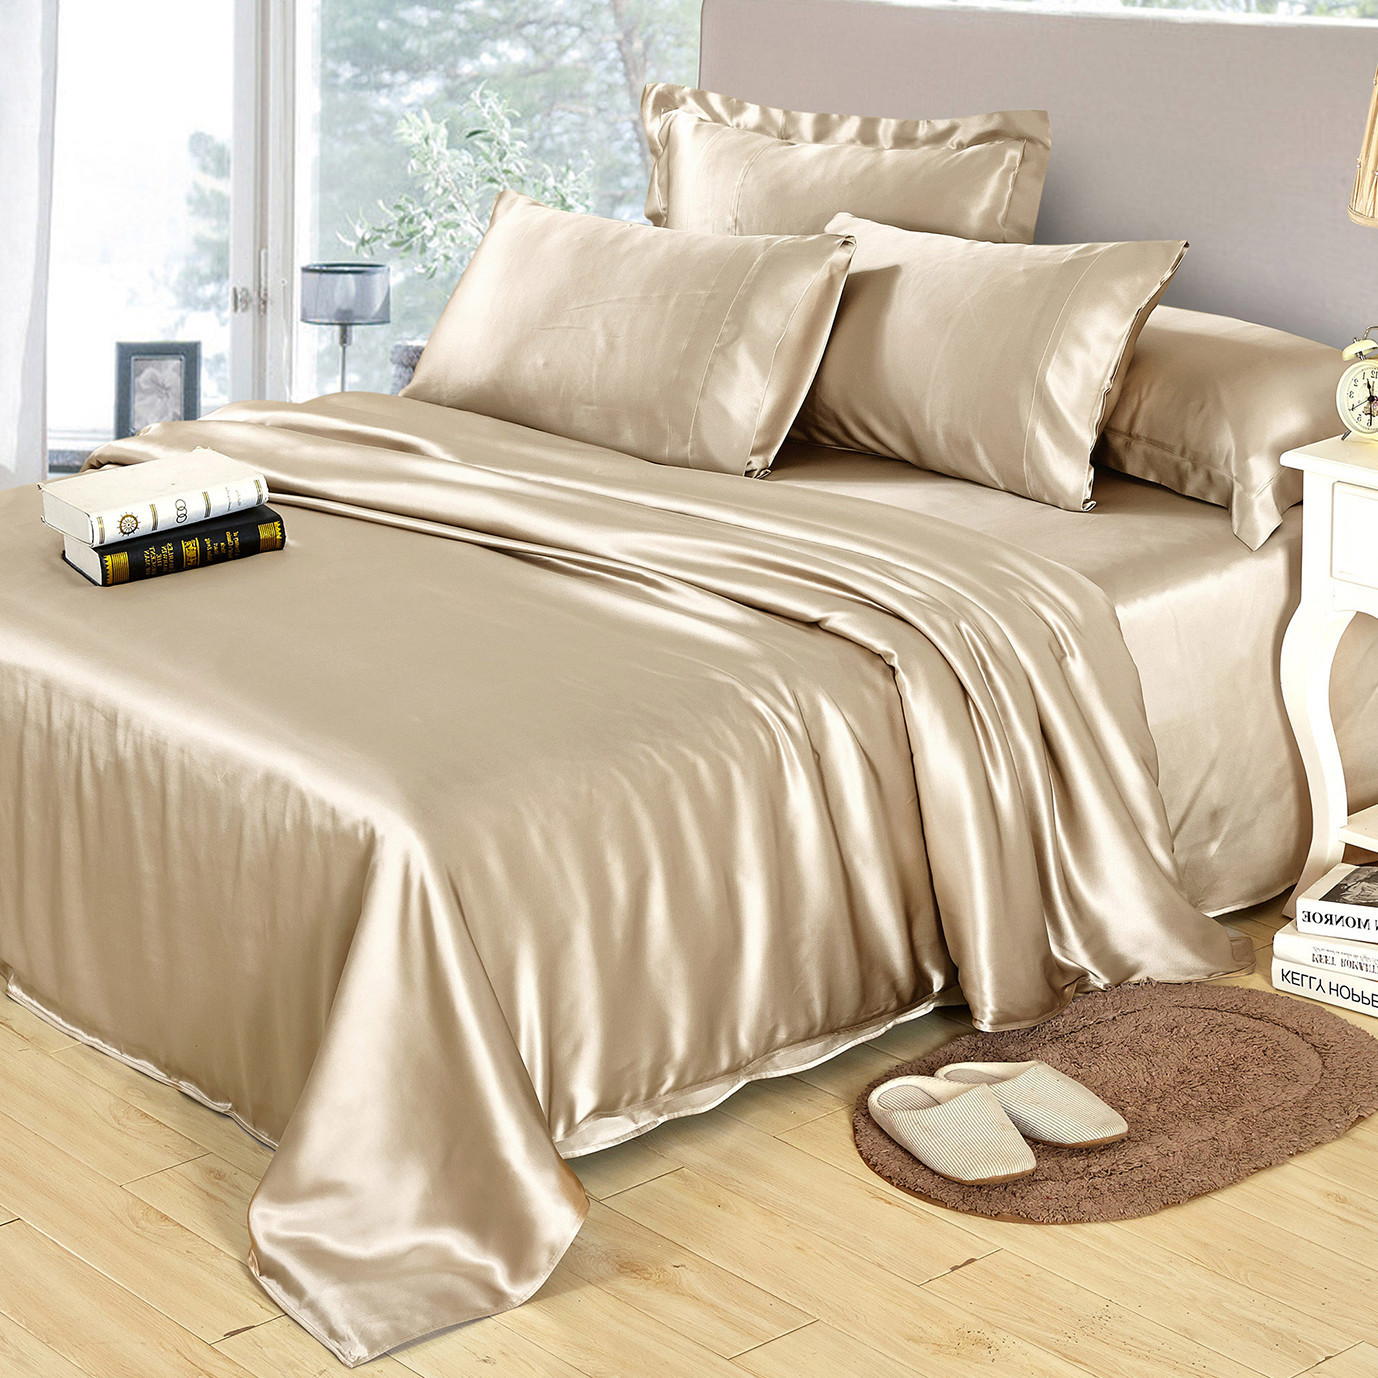 Buy Luxurious Silk Duvet Covers of Duvet Covers from karaz linen online and get a exulde brand with colour